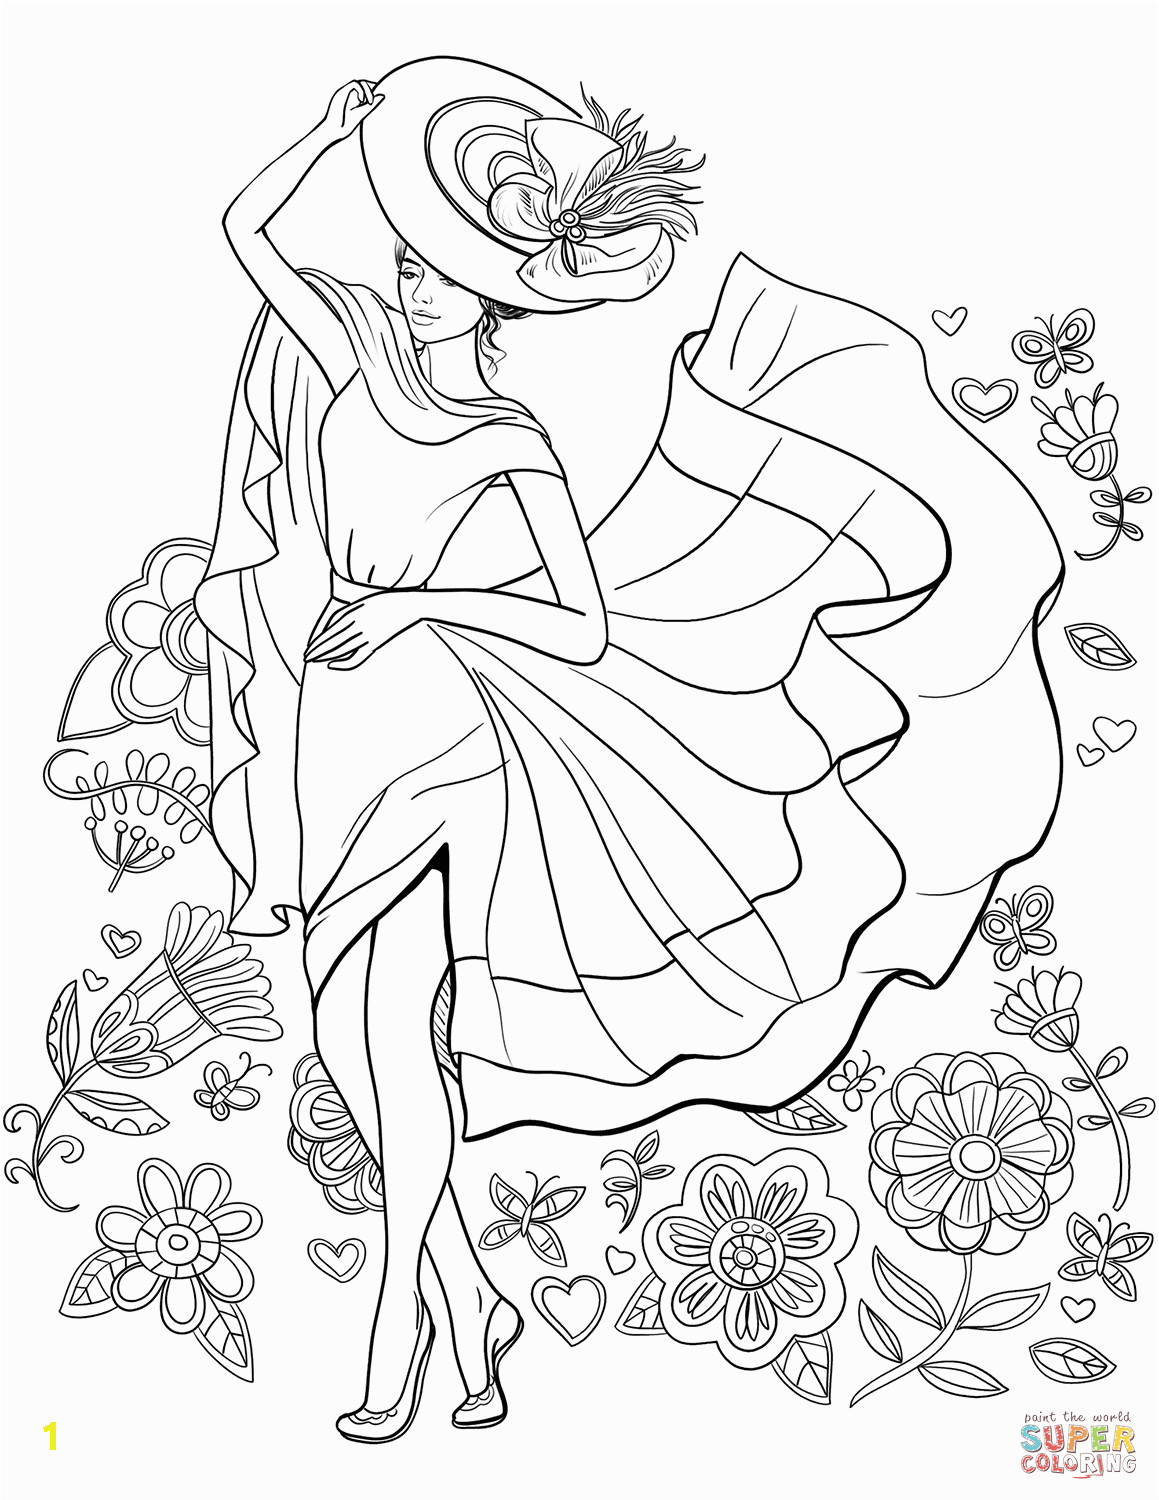 Printable Pin Up Girl Coloring Pages Pin Up Girl Coloring Pages at Getcolorings